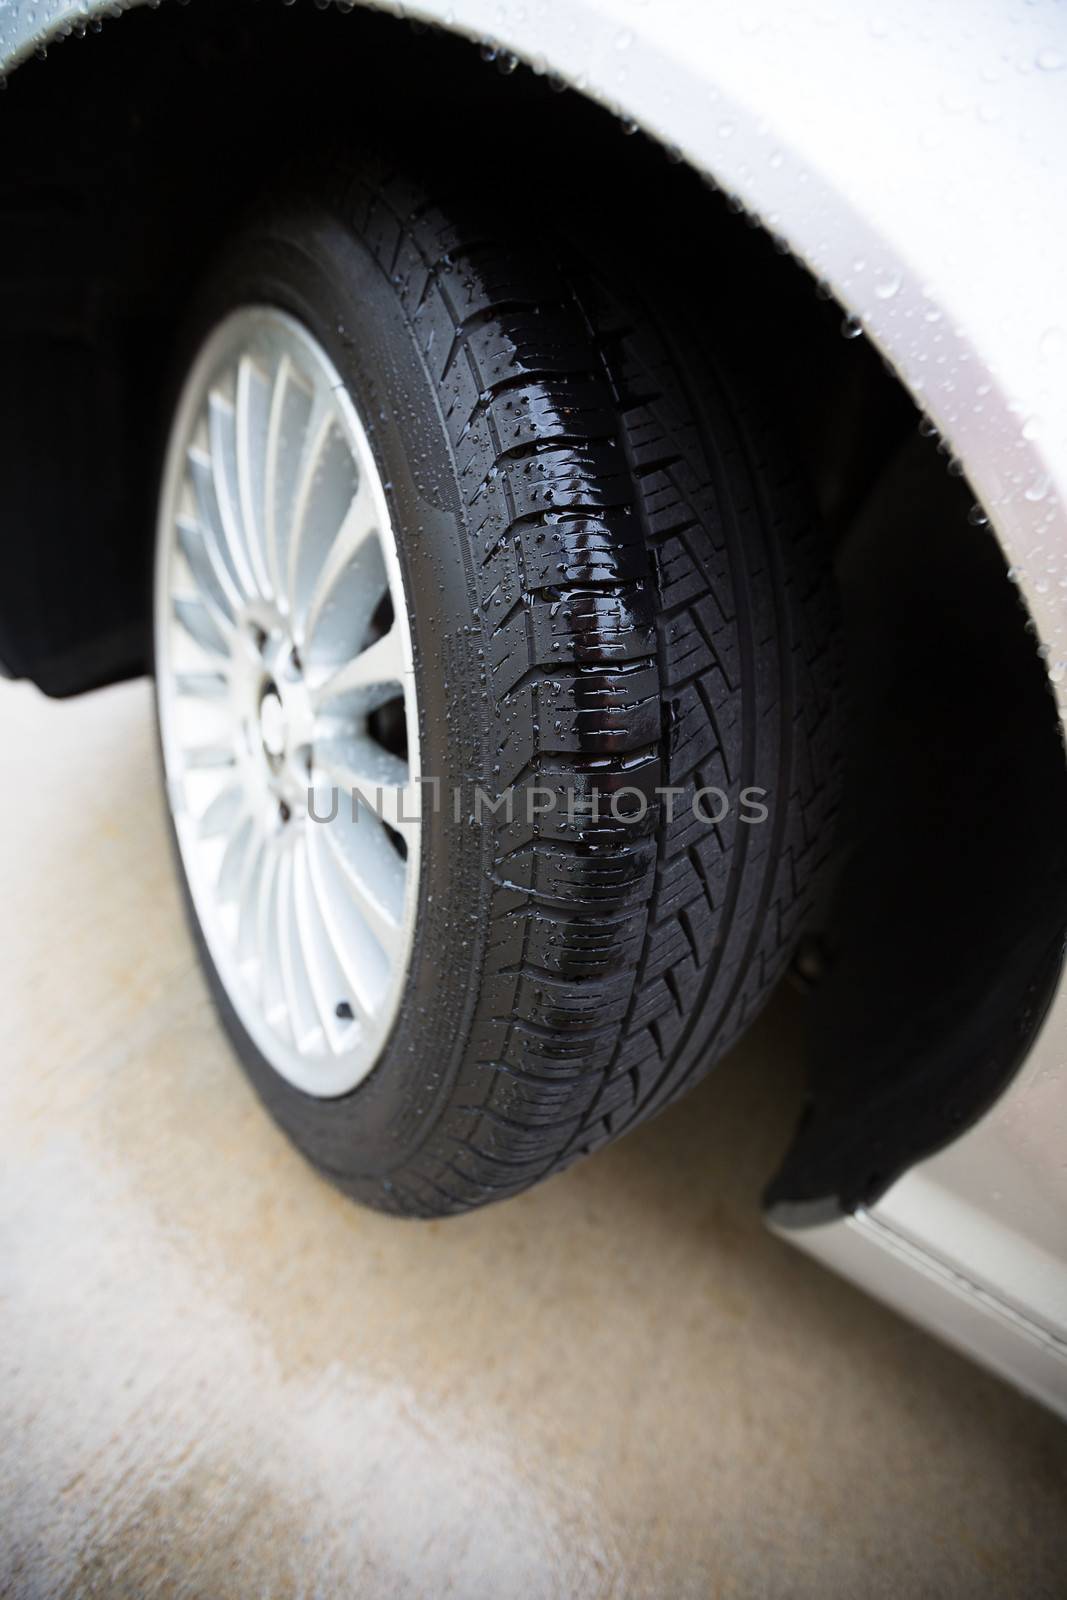 Wet automobile tire, on a concrete pavement, treads are showing clearly with rain in them